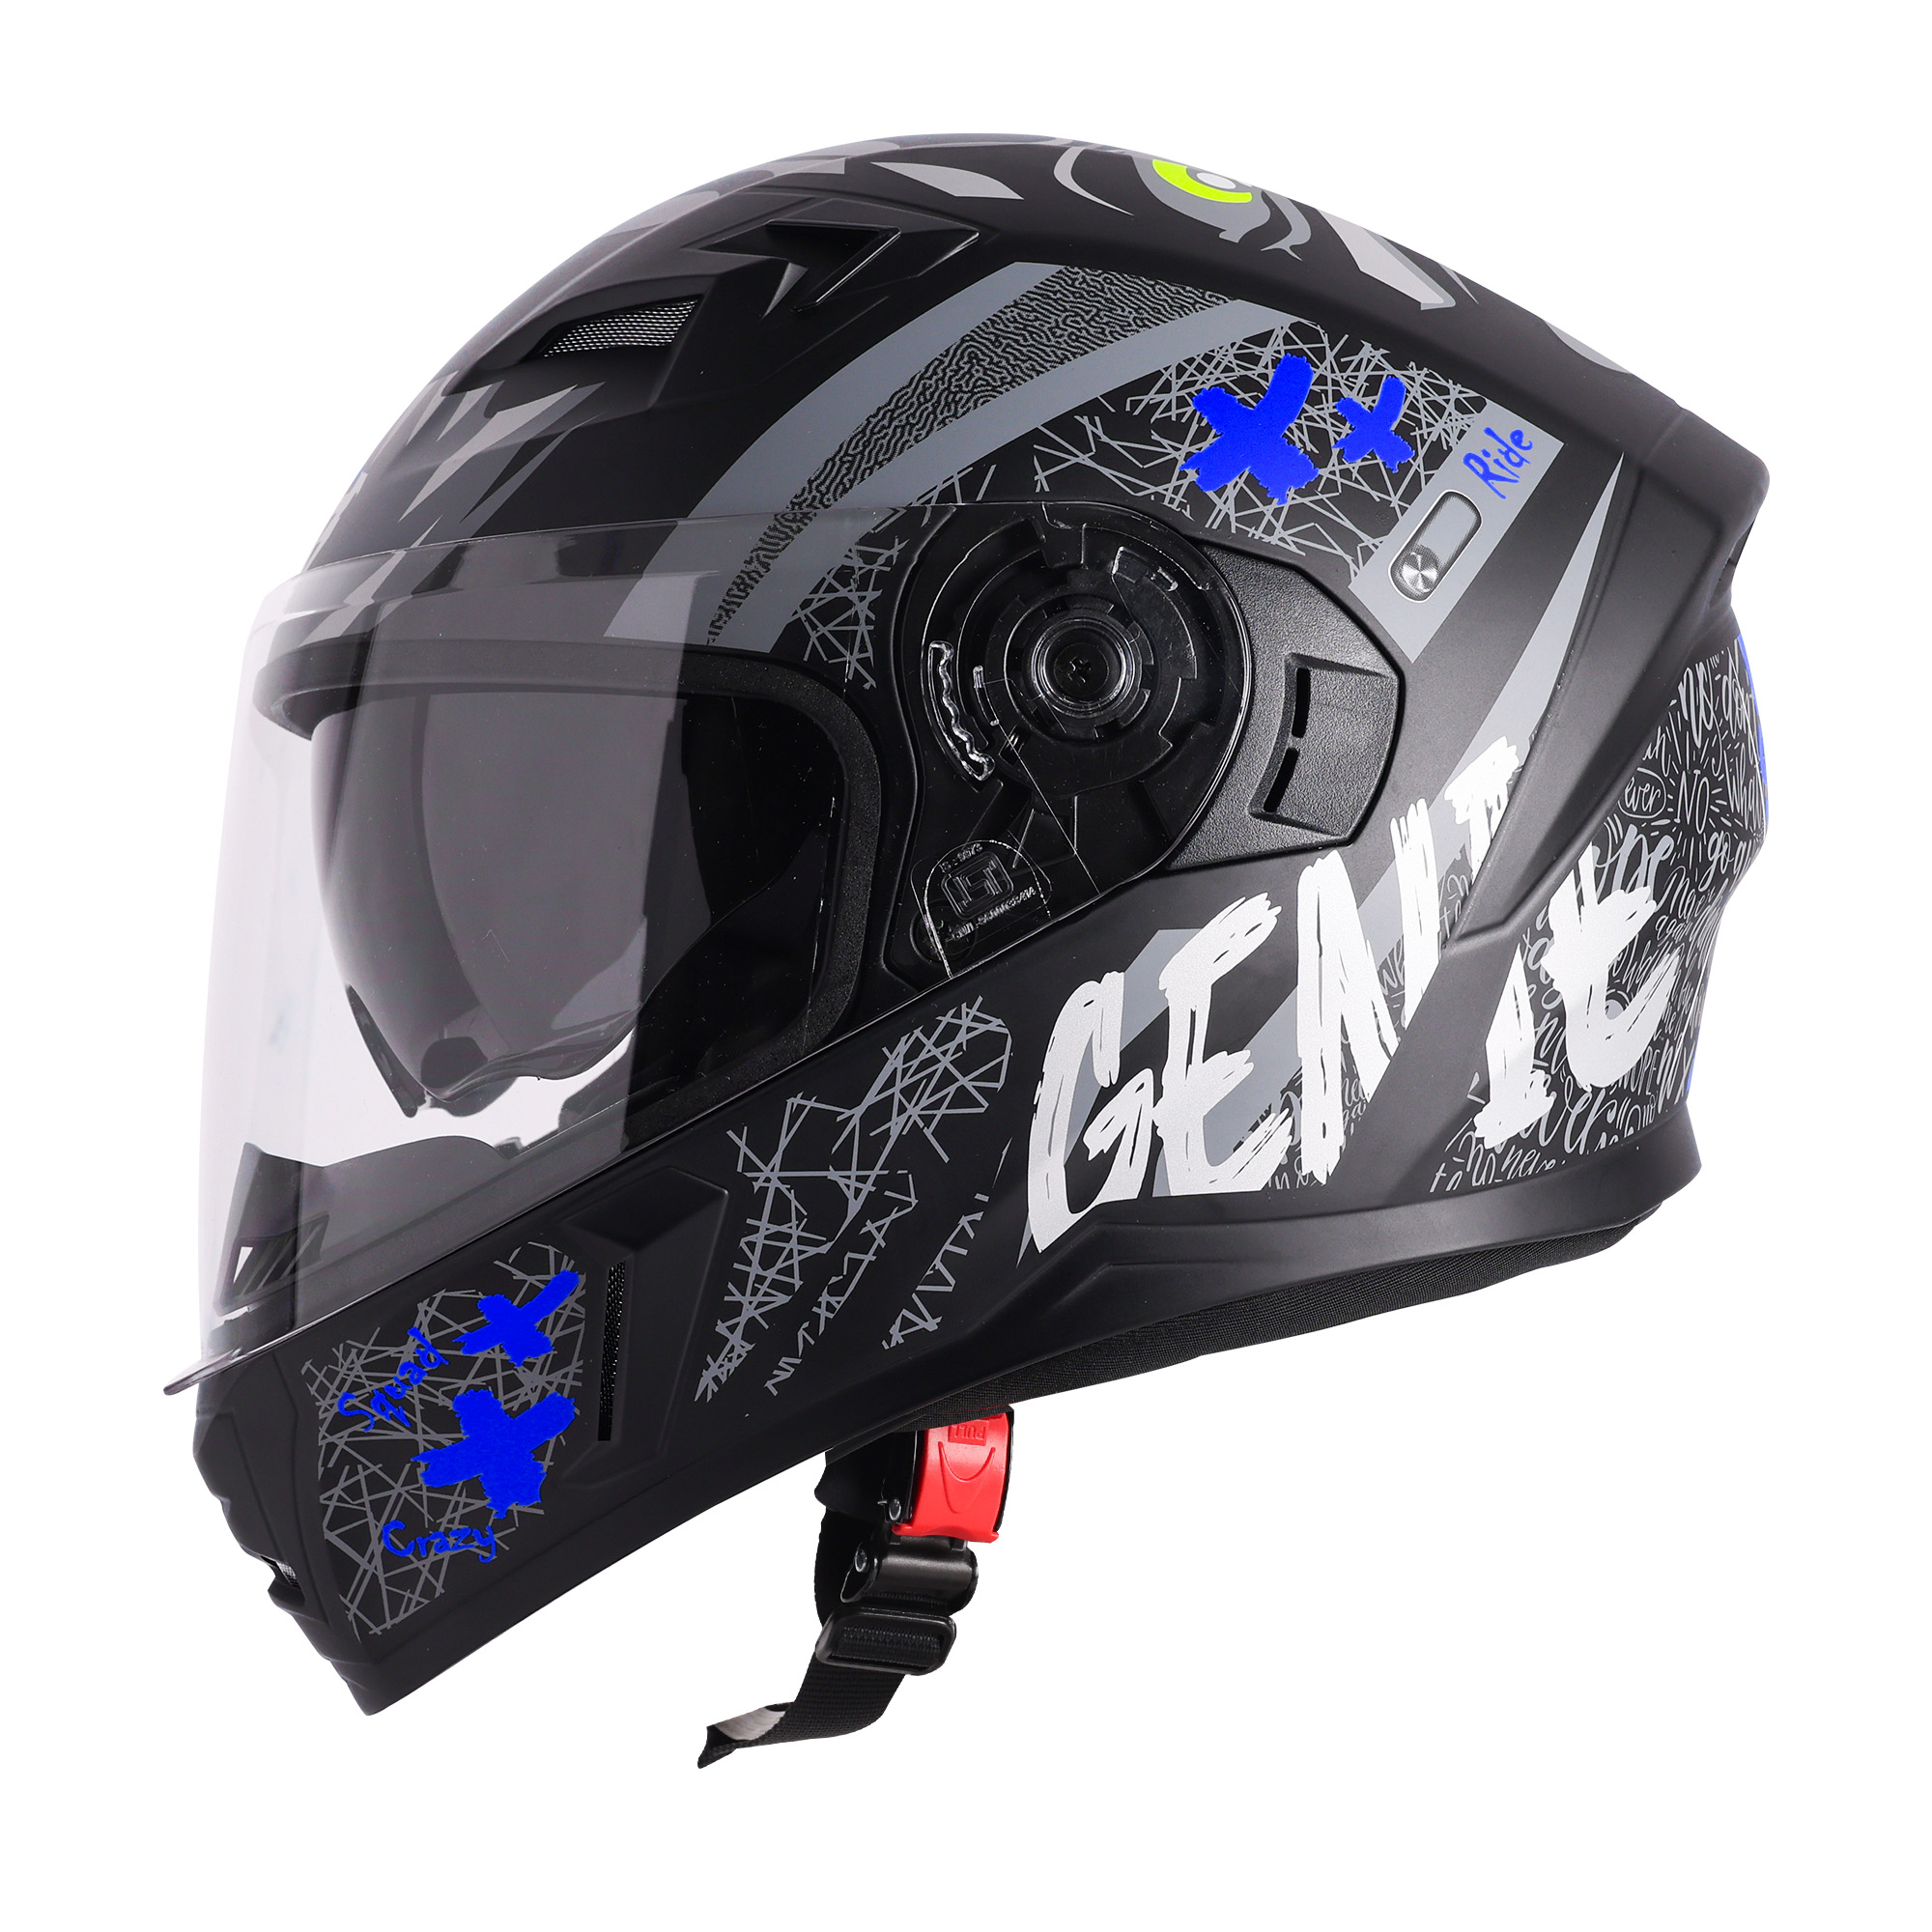 Steelbird SBA-21 Genie ISI Certified Full Face Graphic Helmet for Men and Women with Inner Smoke Sun Shield (Glossy Black Blue)